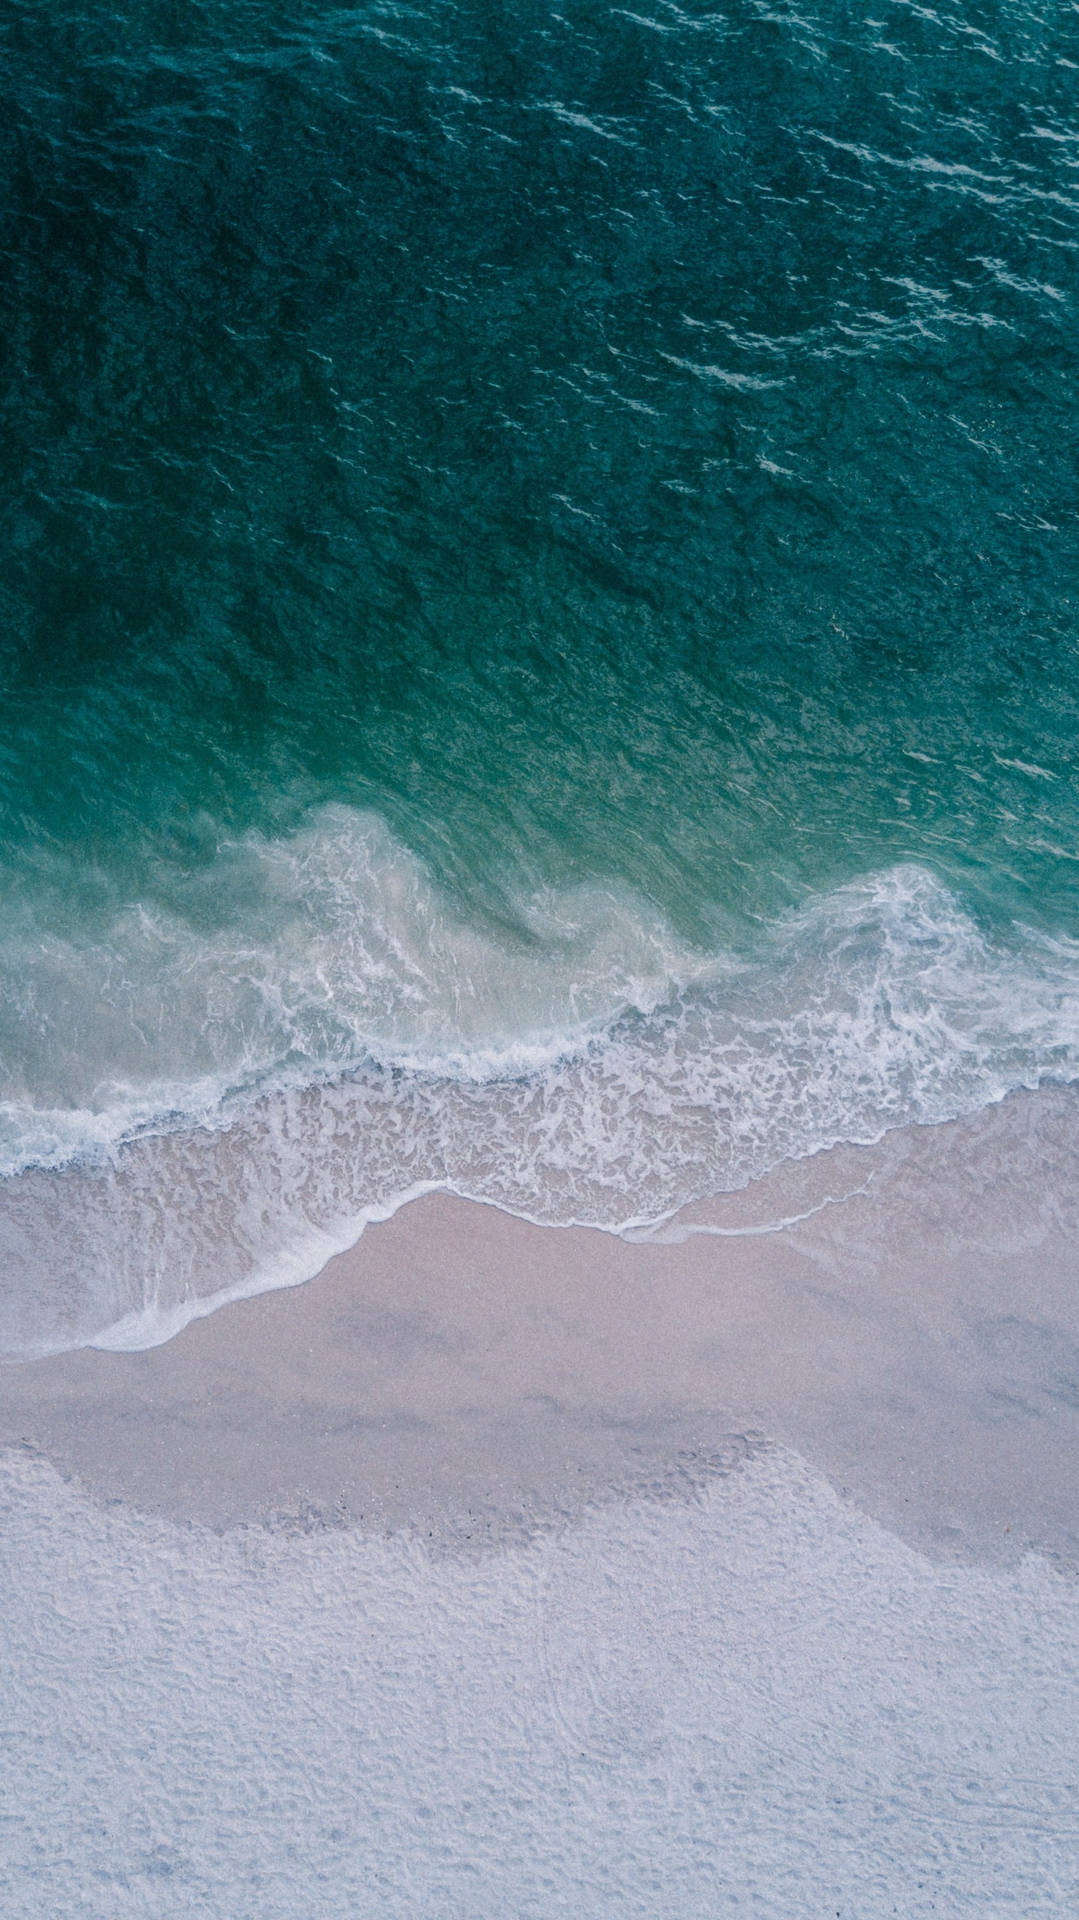 4k Iphone Waves At White Sand Beach Wallpaper